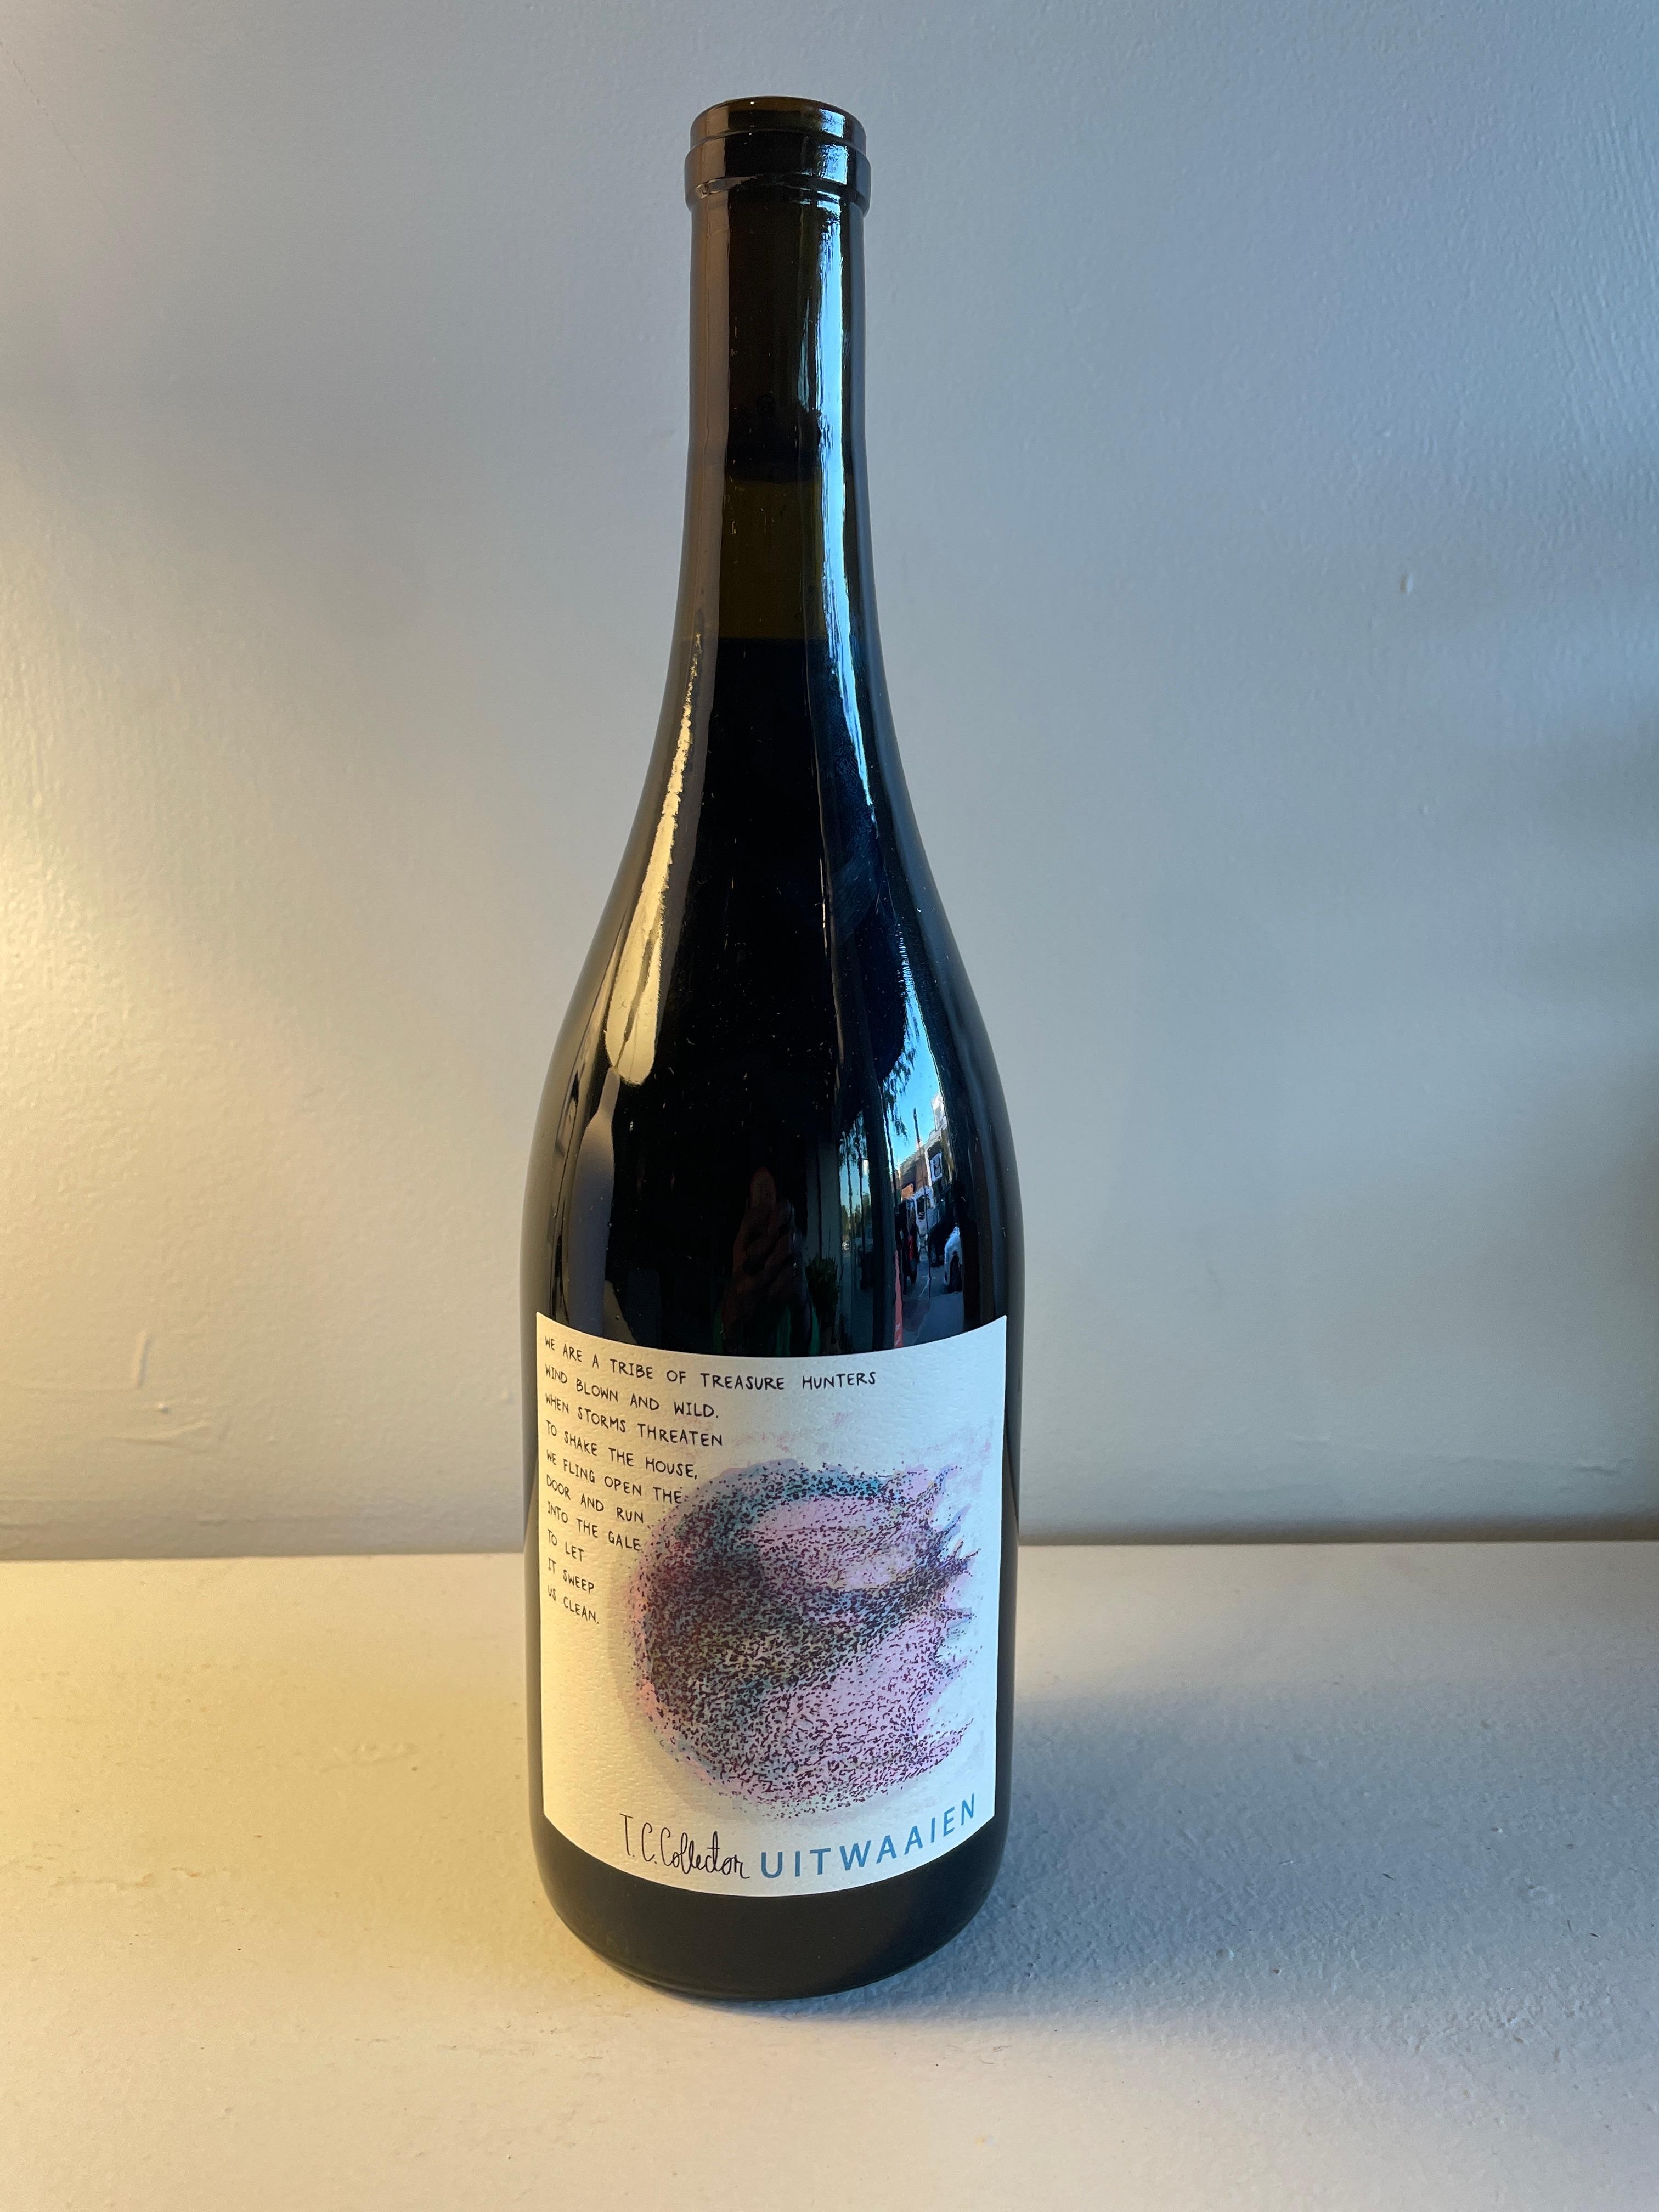 2021 Pinot Noir/Gamay "Uitwaaien", The Color Collector, OR